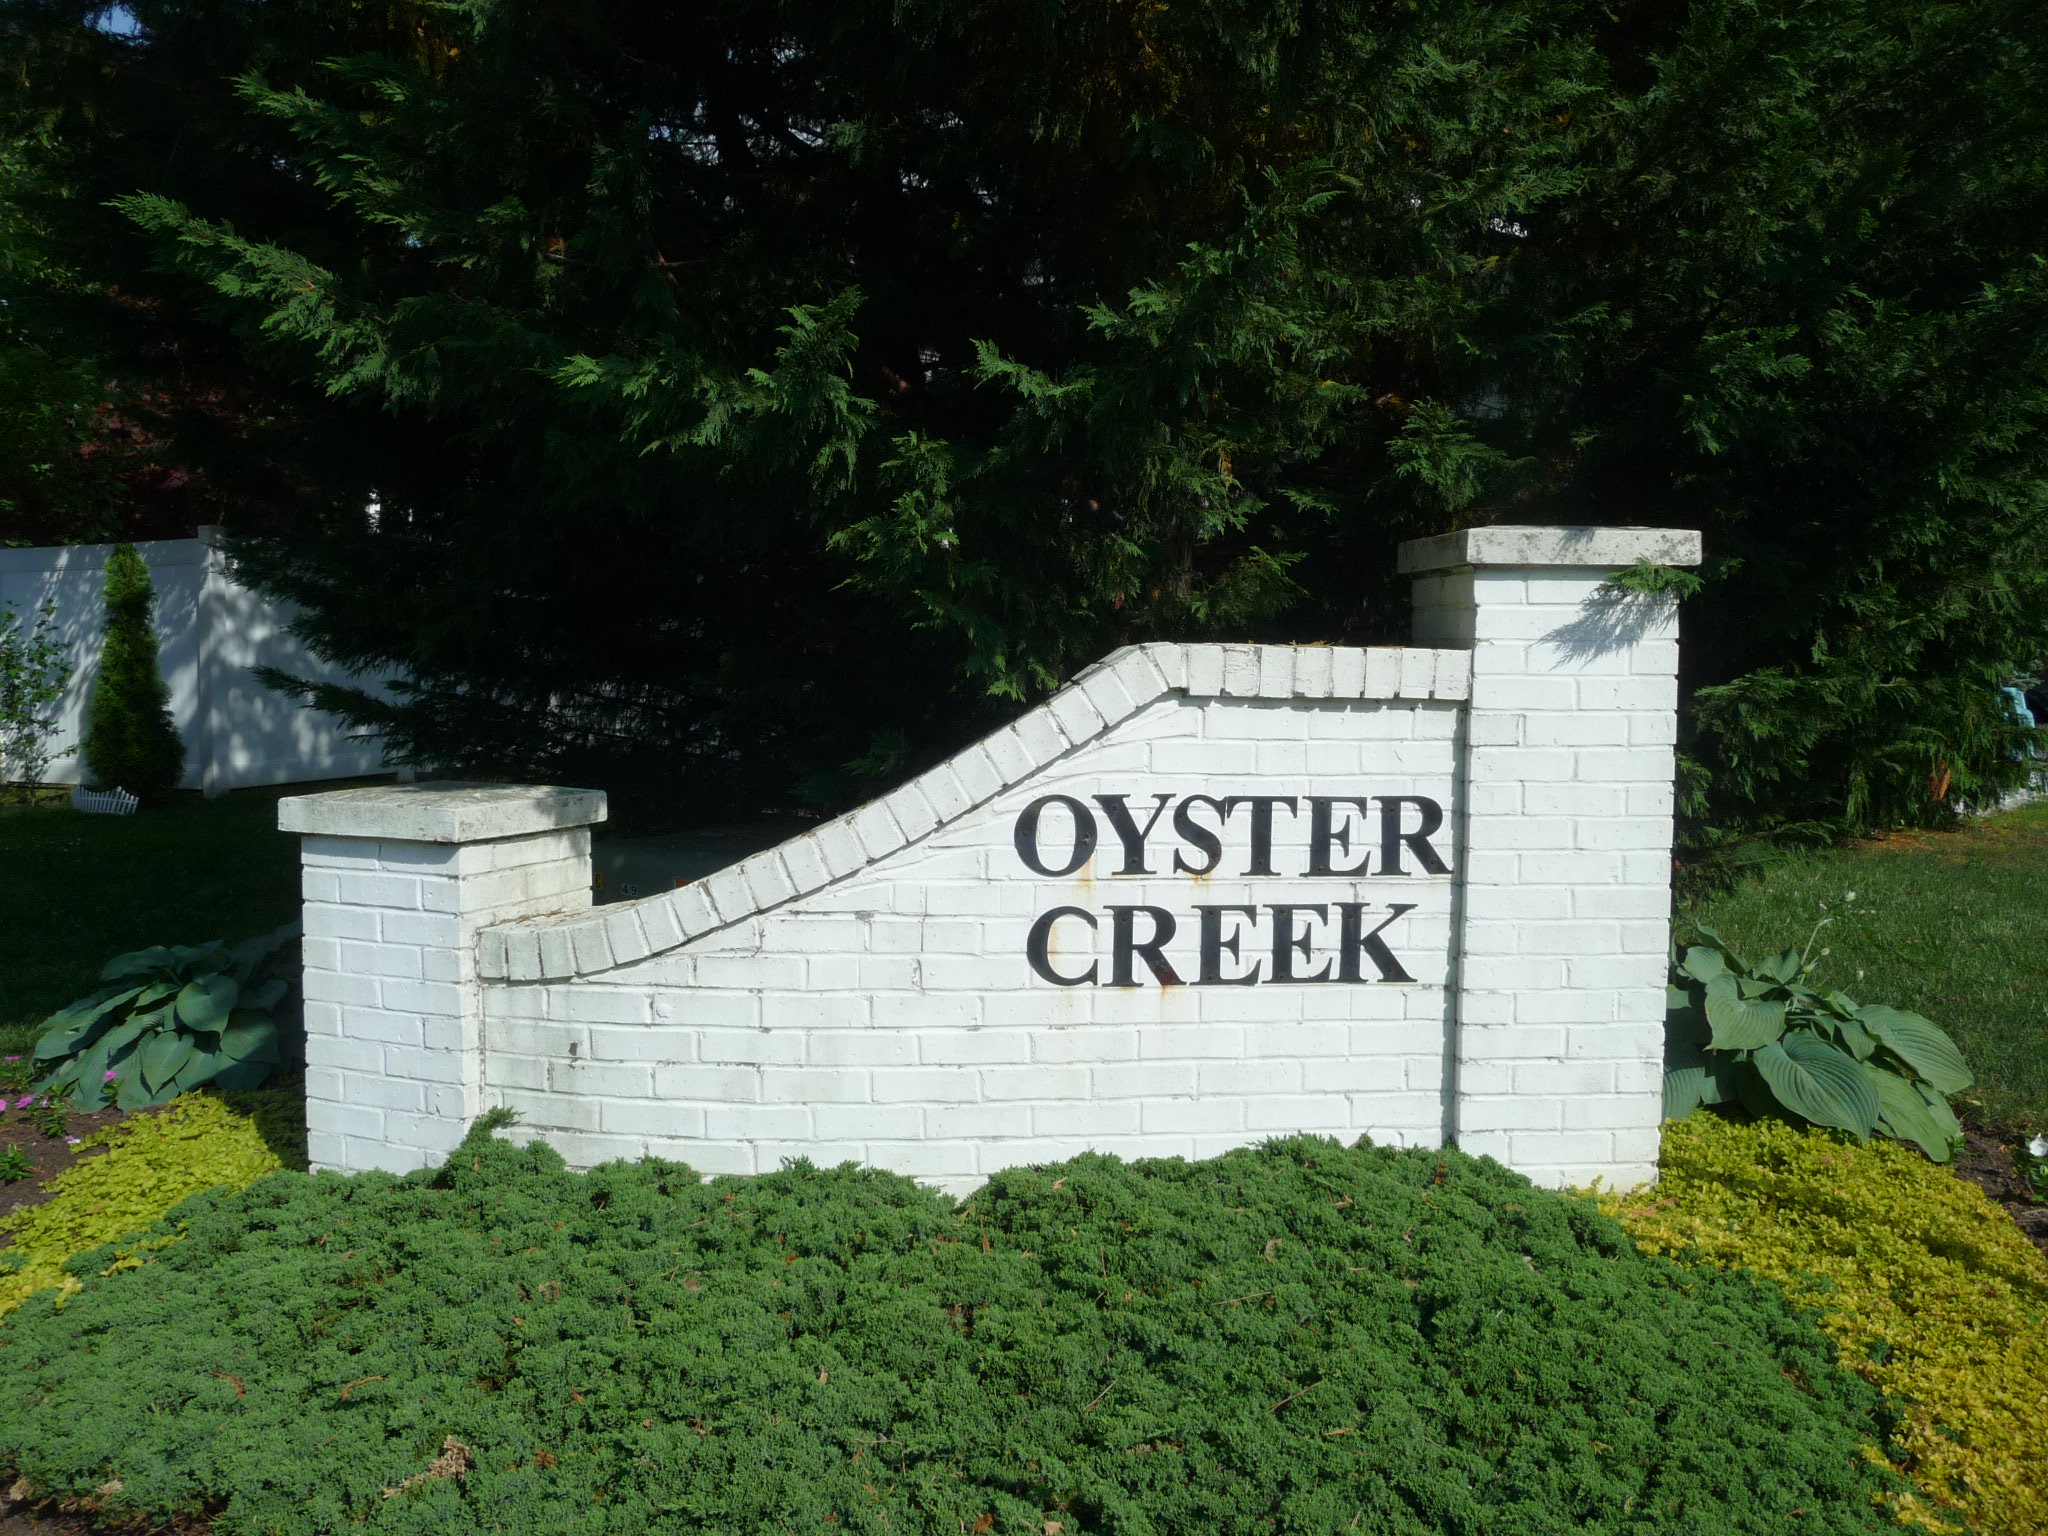 Entrance to Oyster Creek condominiums.